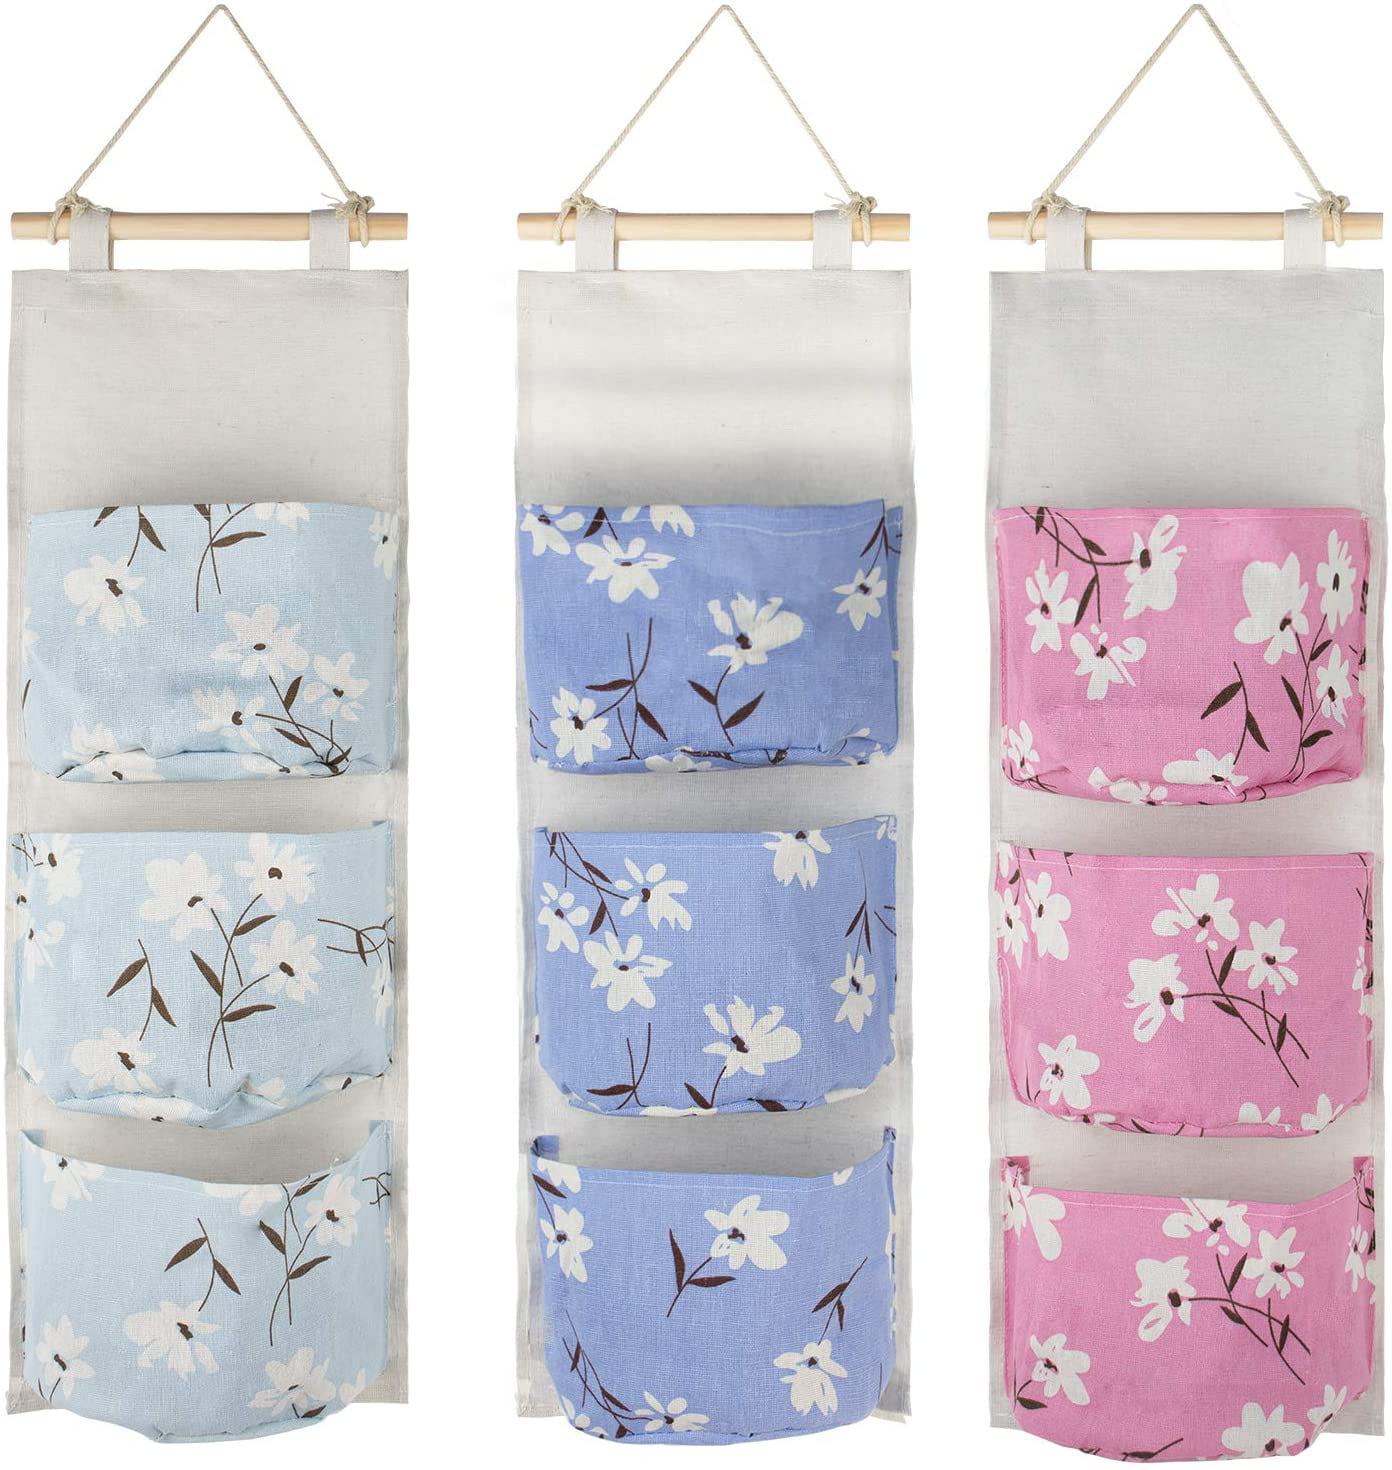 3Pcs Waterproof Over The Door Closet Organizer Linen Fabric Hanging Pocket Organizer with 3 Pockets for Kitchen Bedroom Bathroom Office Wall Hanging Storage Bags 